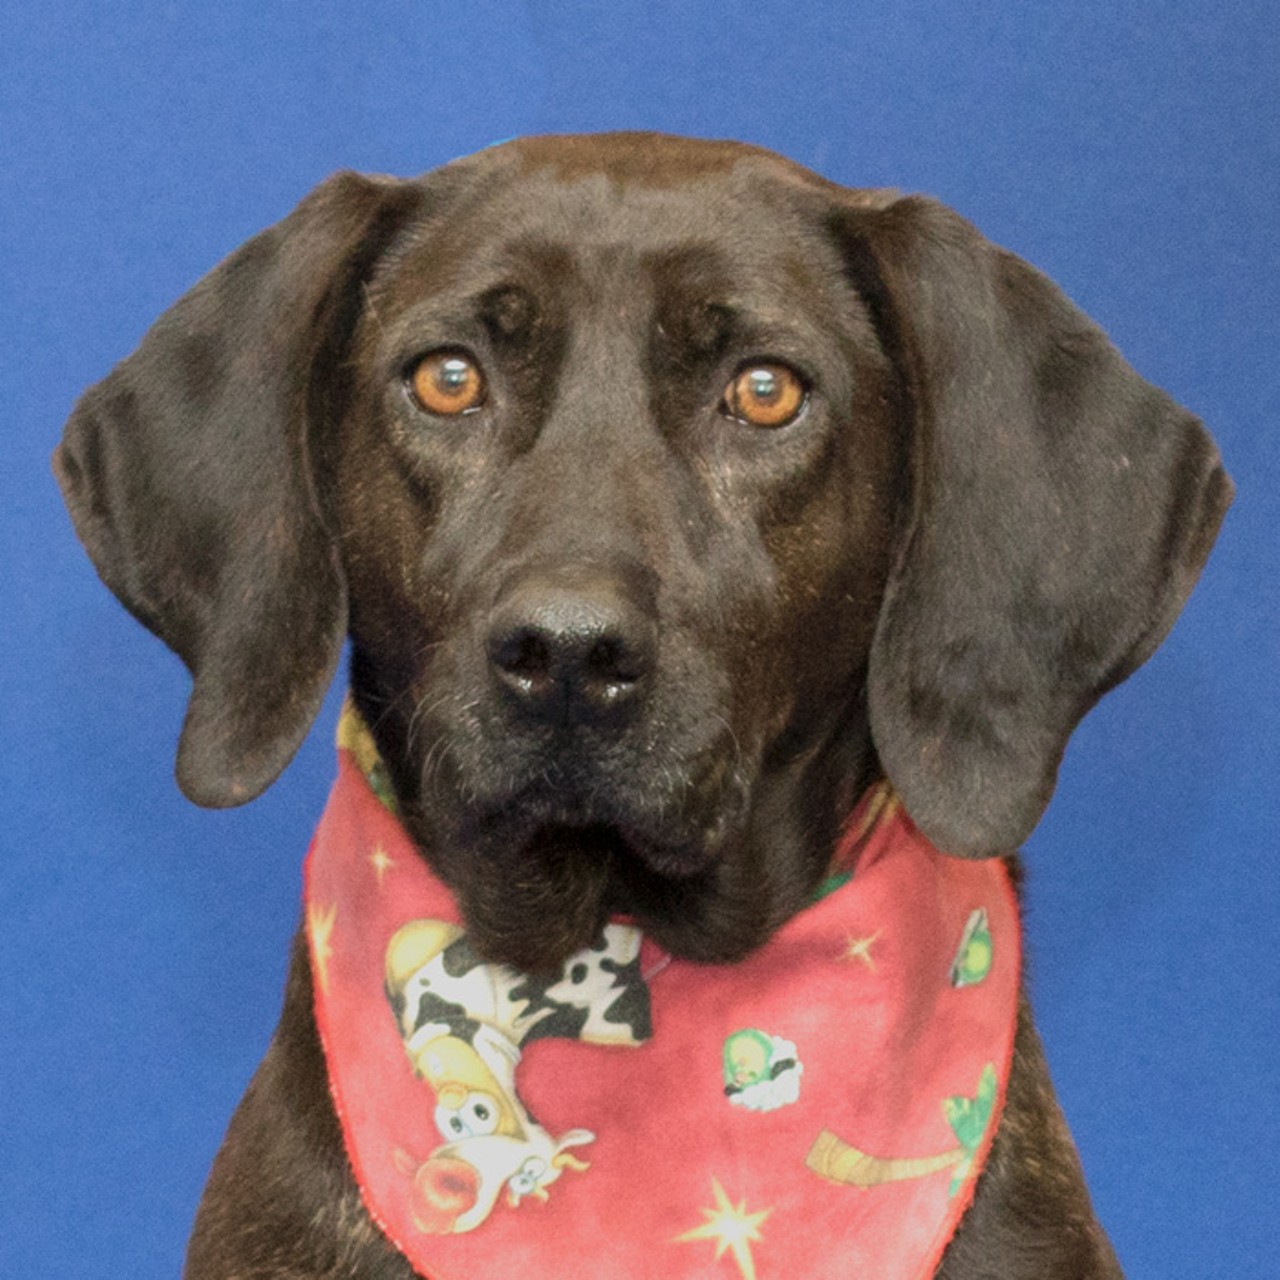  NAME: Sasha
GENDER: Female
BREED: Hound
AGE: 4 years
WEIGHT: 65 pounds
SPECIAL CONSIDERATIONS: None
REASON I CAME TO MHS: Agency transfer
LOCATION: Berman Center for Animal Care in Westland
ID NUMBER: 862891